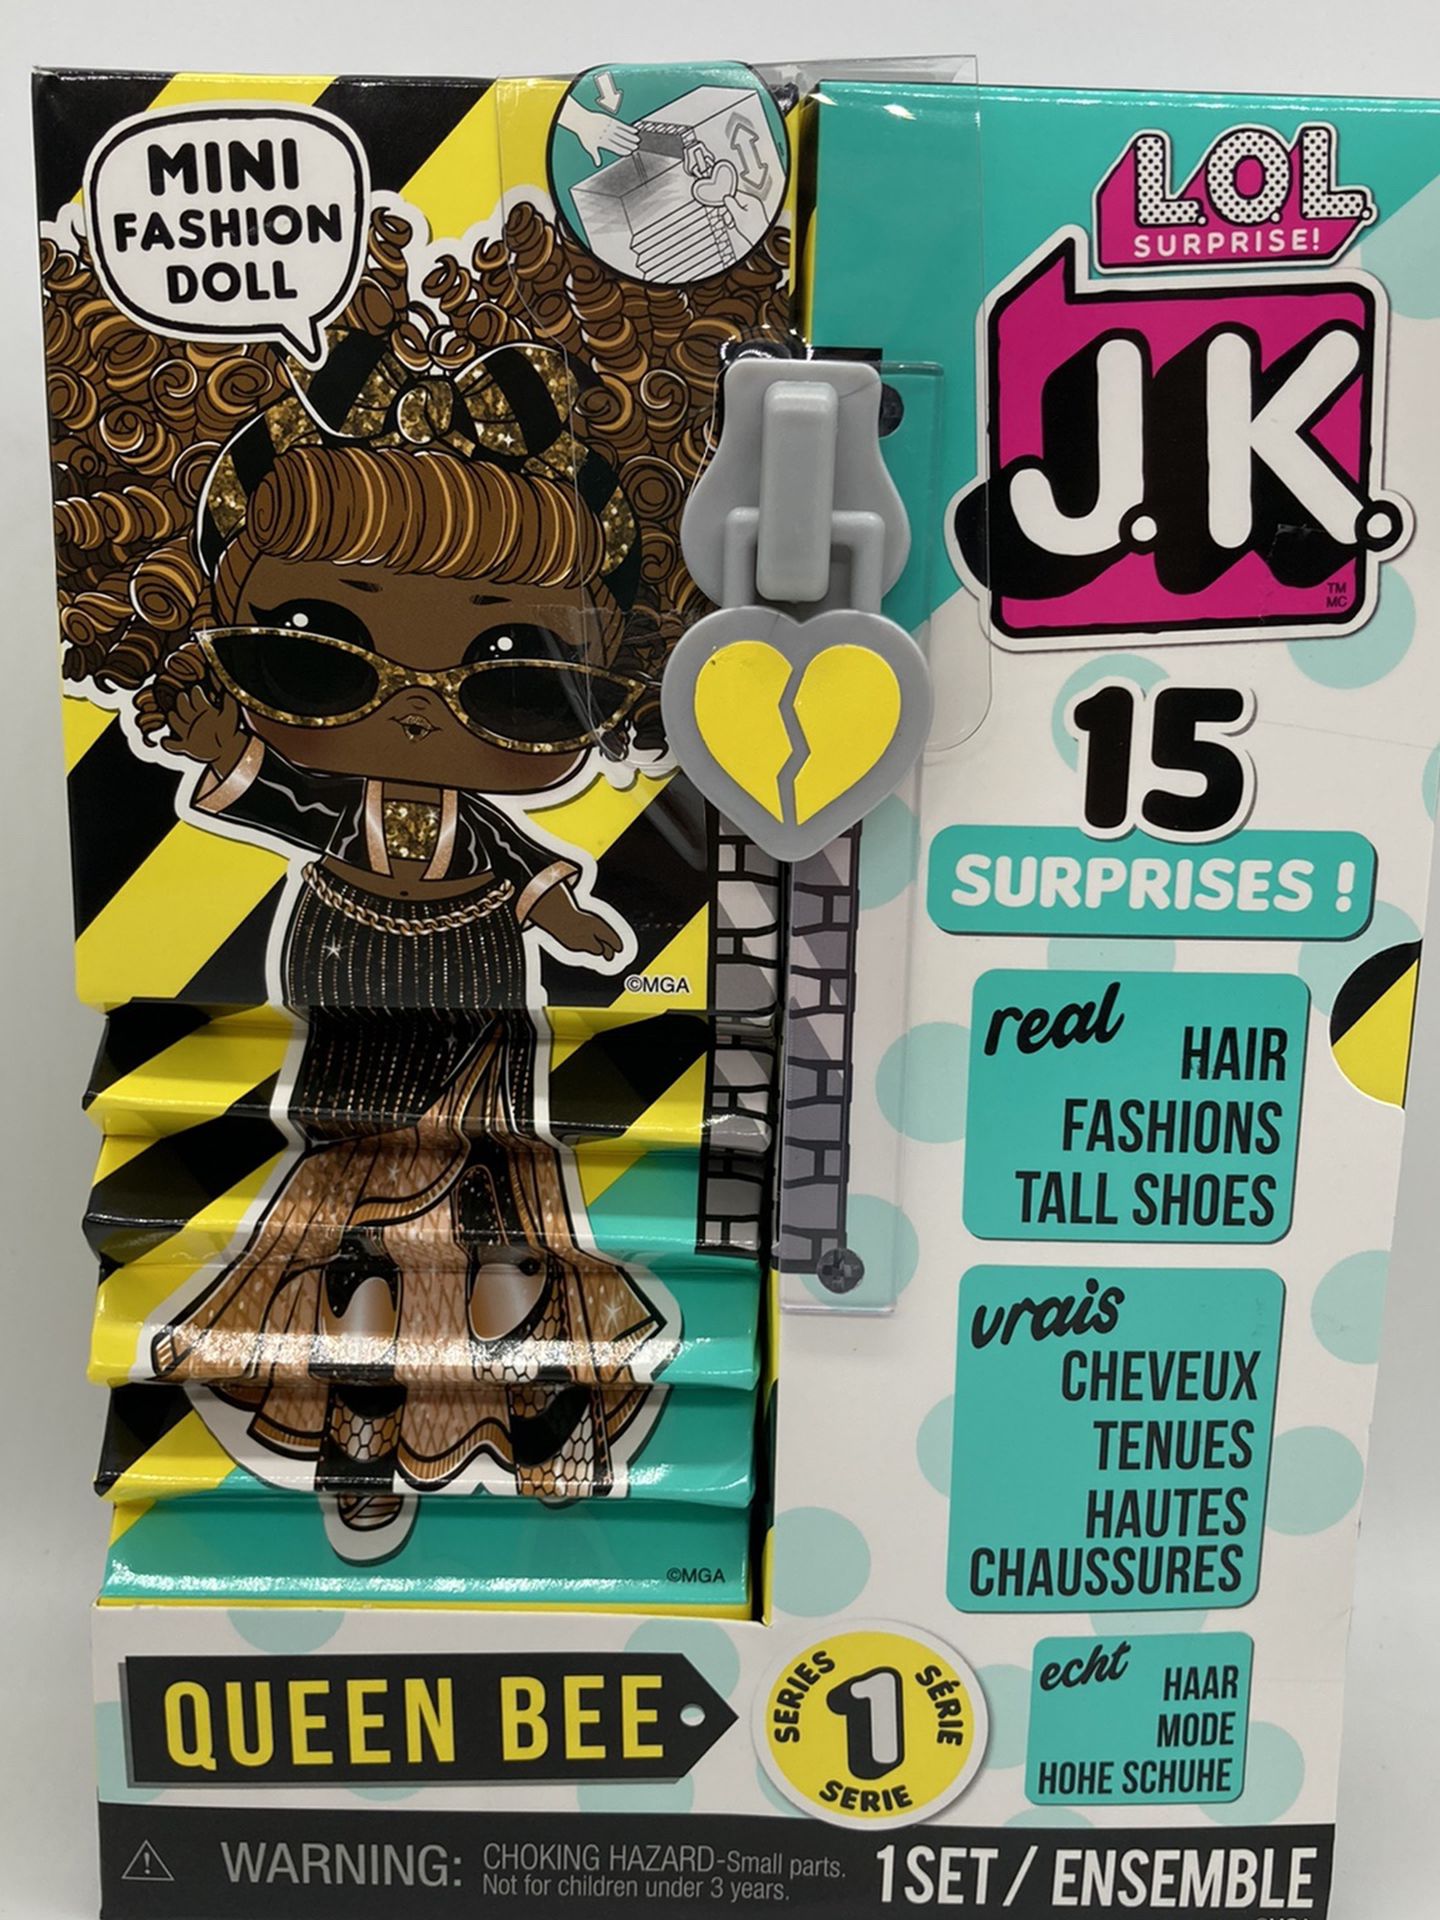 LOL Surprise JK QUEEN BEE Mini Fashion Doll 15 Surprises Series 1 Real Hair New